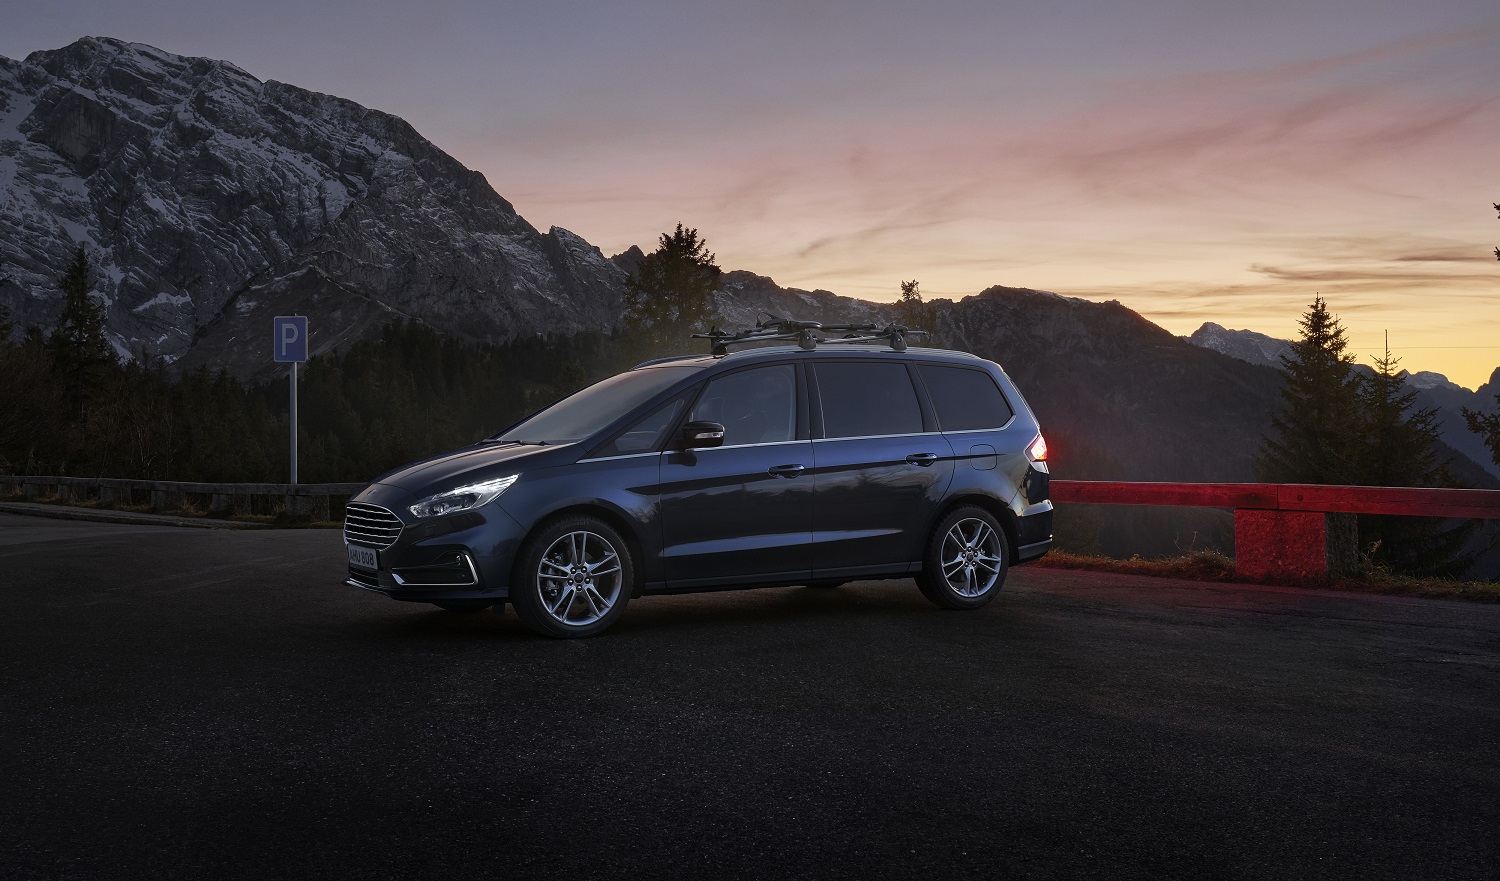 Ford Europe still believes in MPVs, updates S-Max and Galaxy